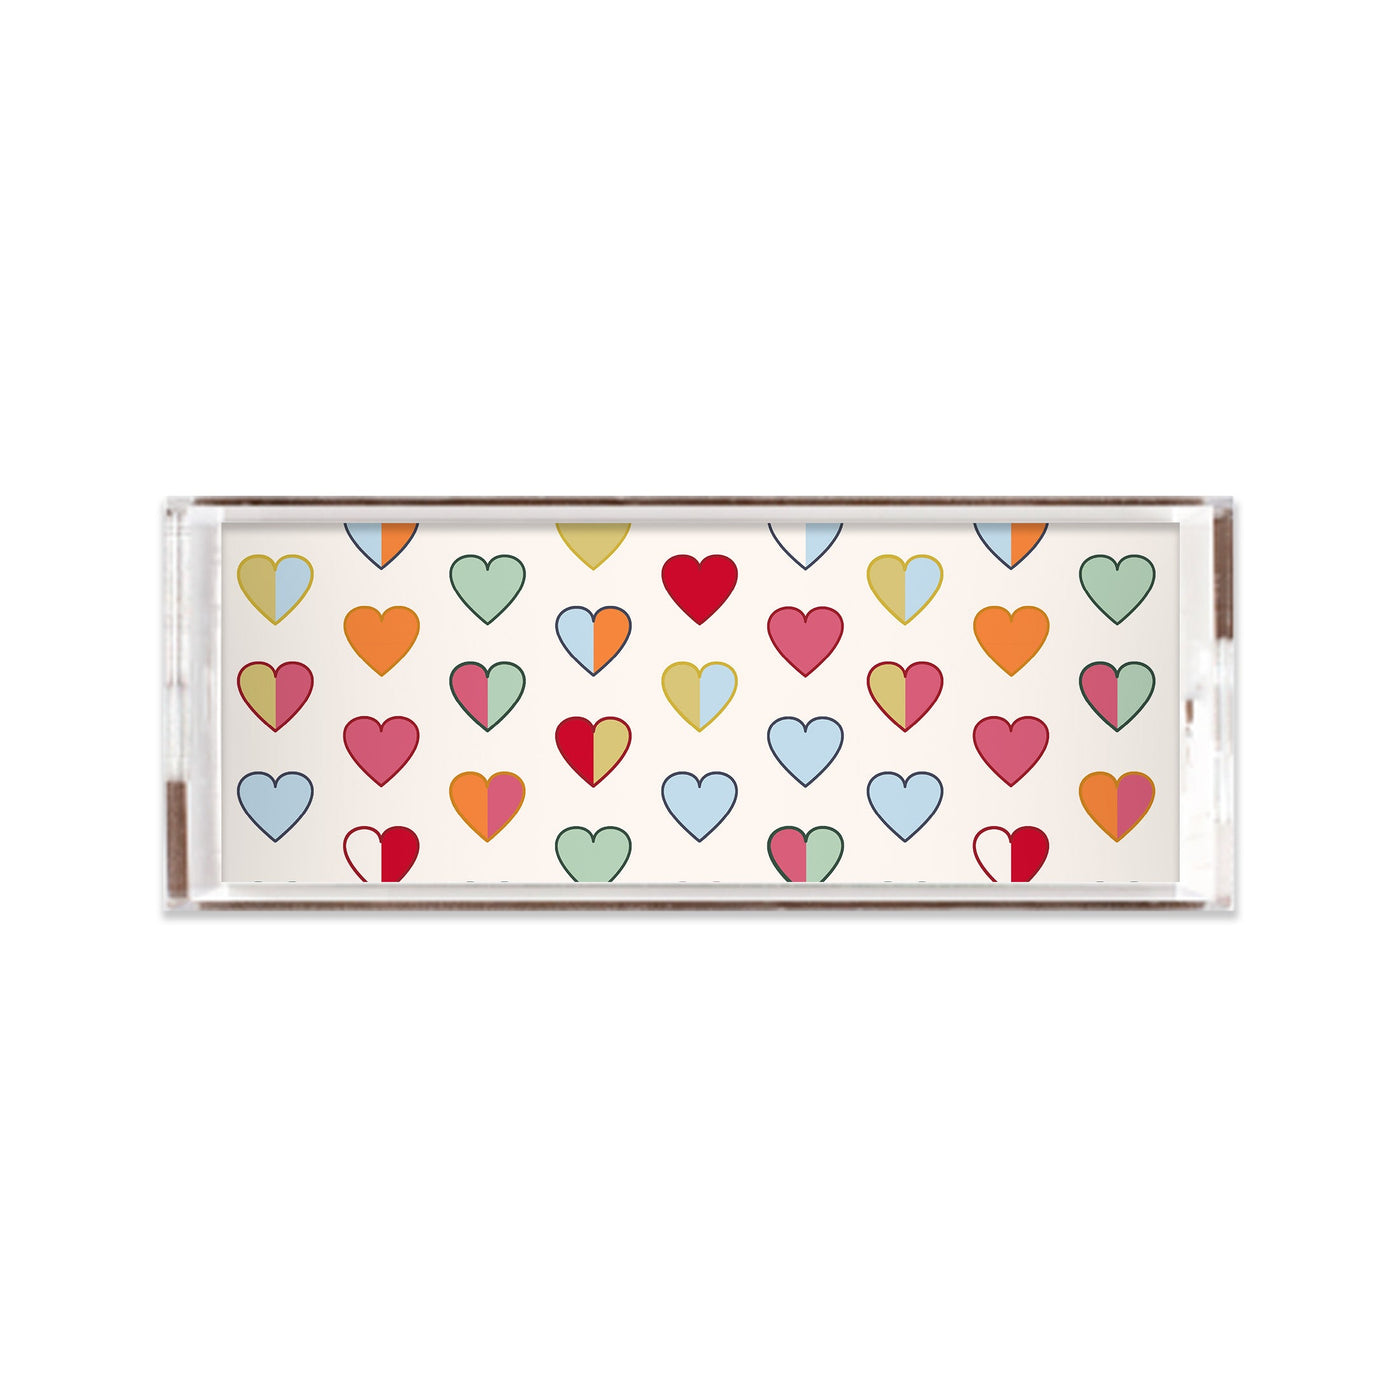 Lucite Trays Multi / 11x4 Hearts Lucite Tray Katie Kime